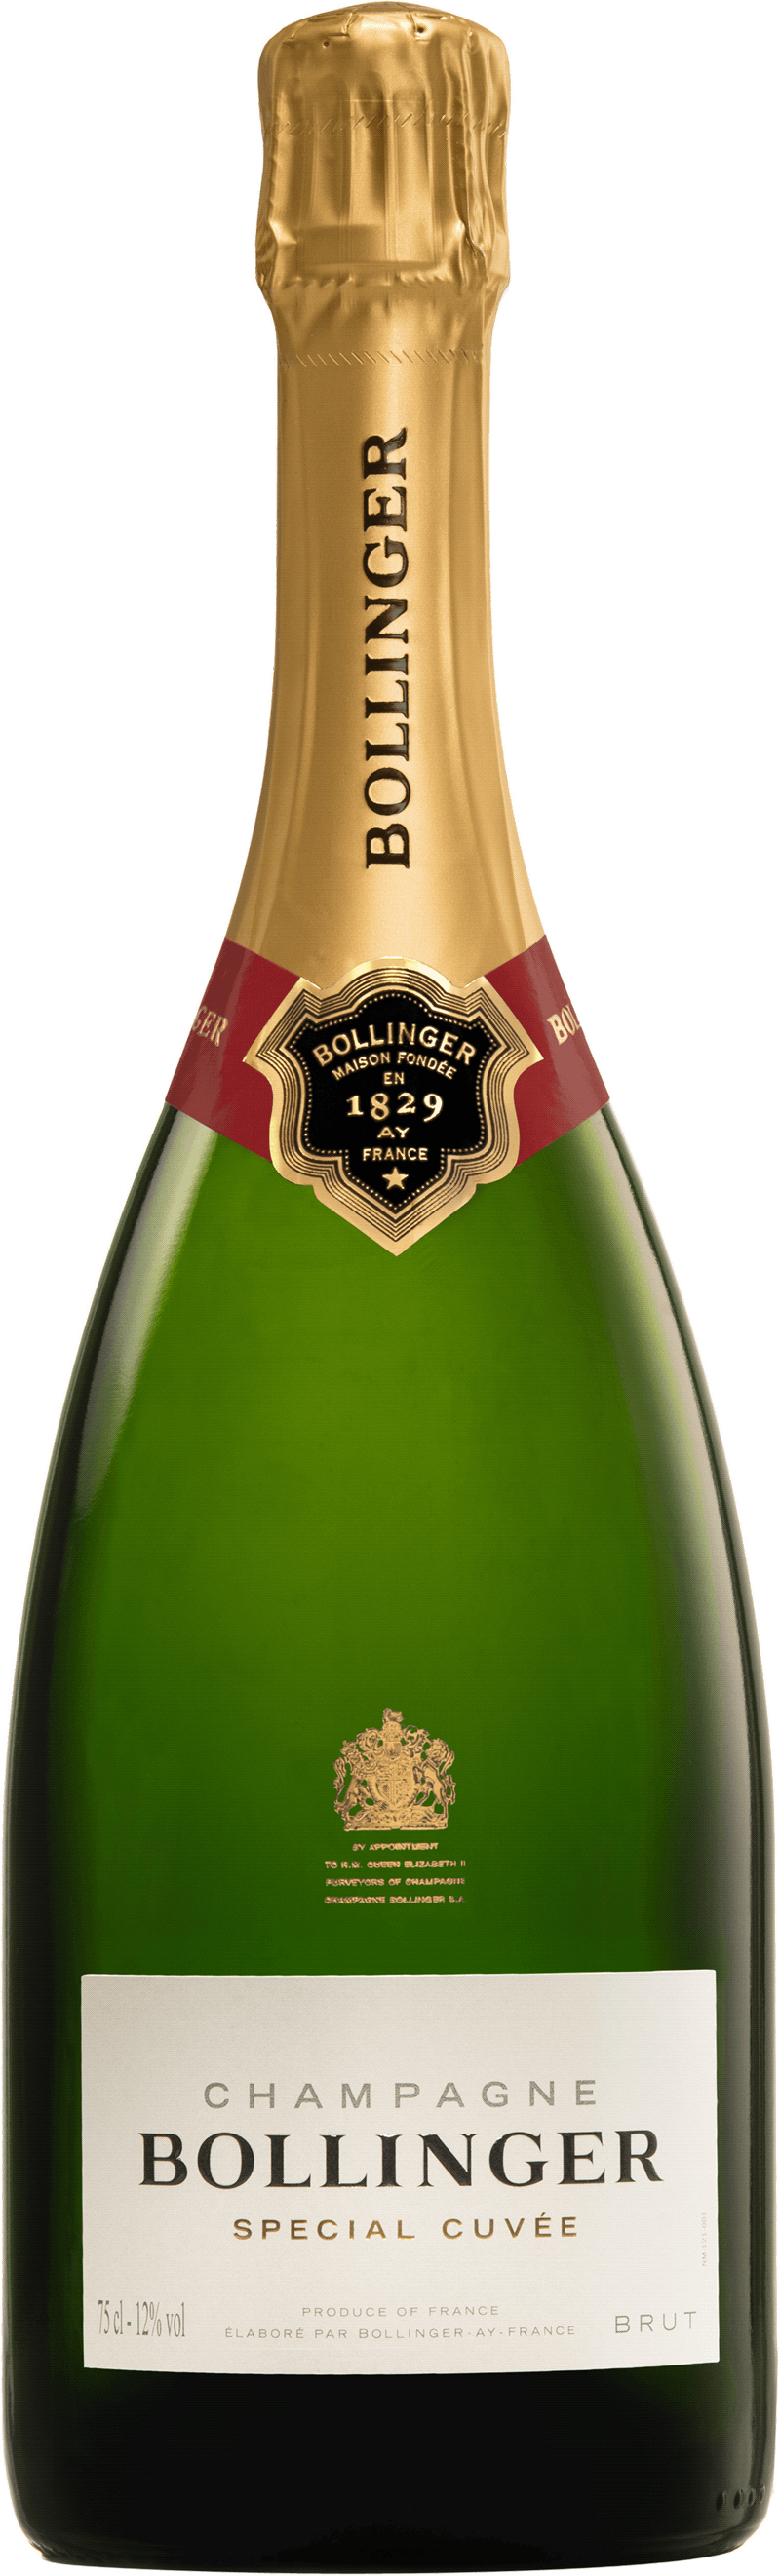 An image of a bottle of Bollinger Special Cuvee Brut Champagne, one of the World's Best Champagnes